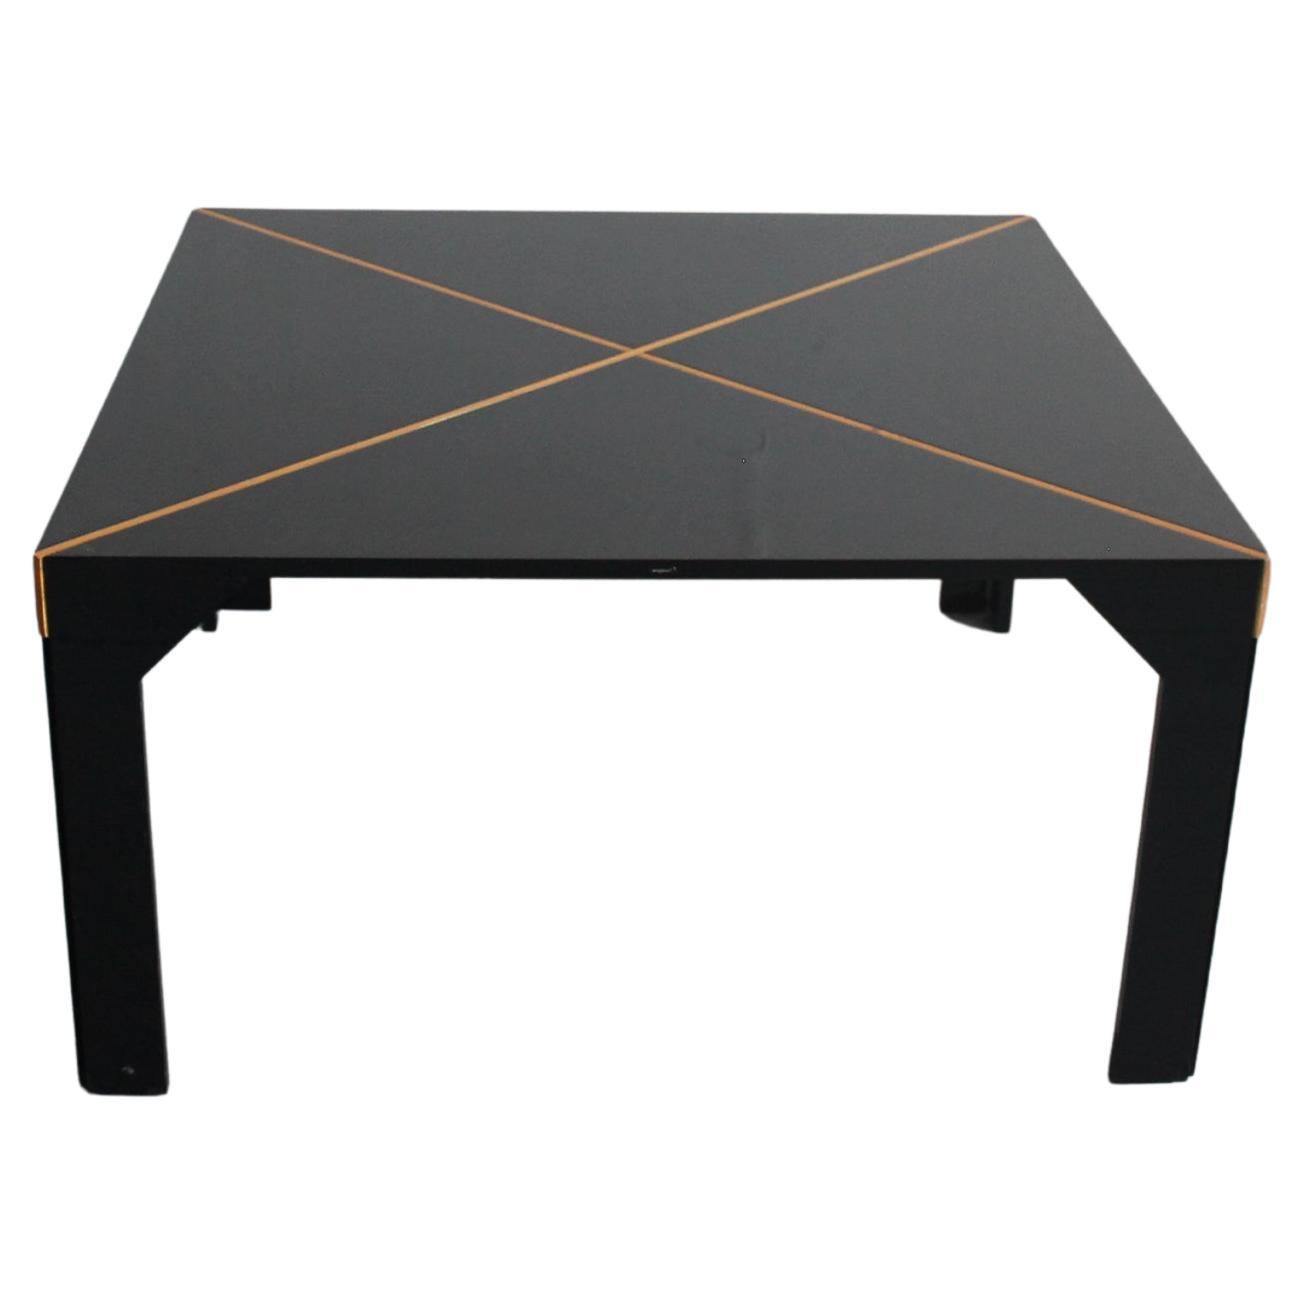 Vico Magistretti Tema Square Table in Black Lacquered Wood by B&B 1970s